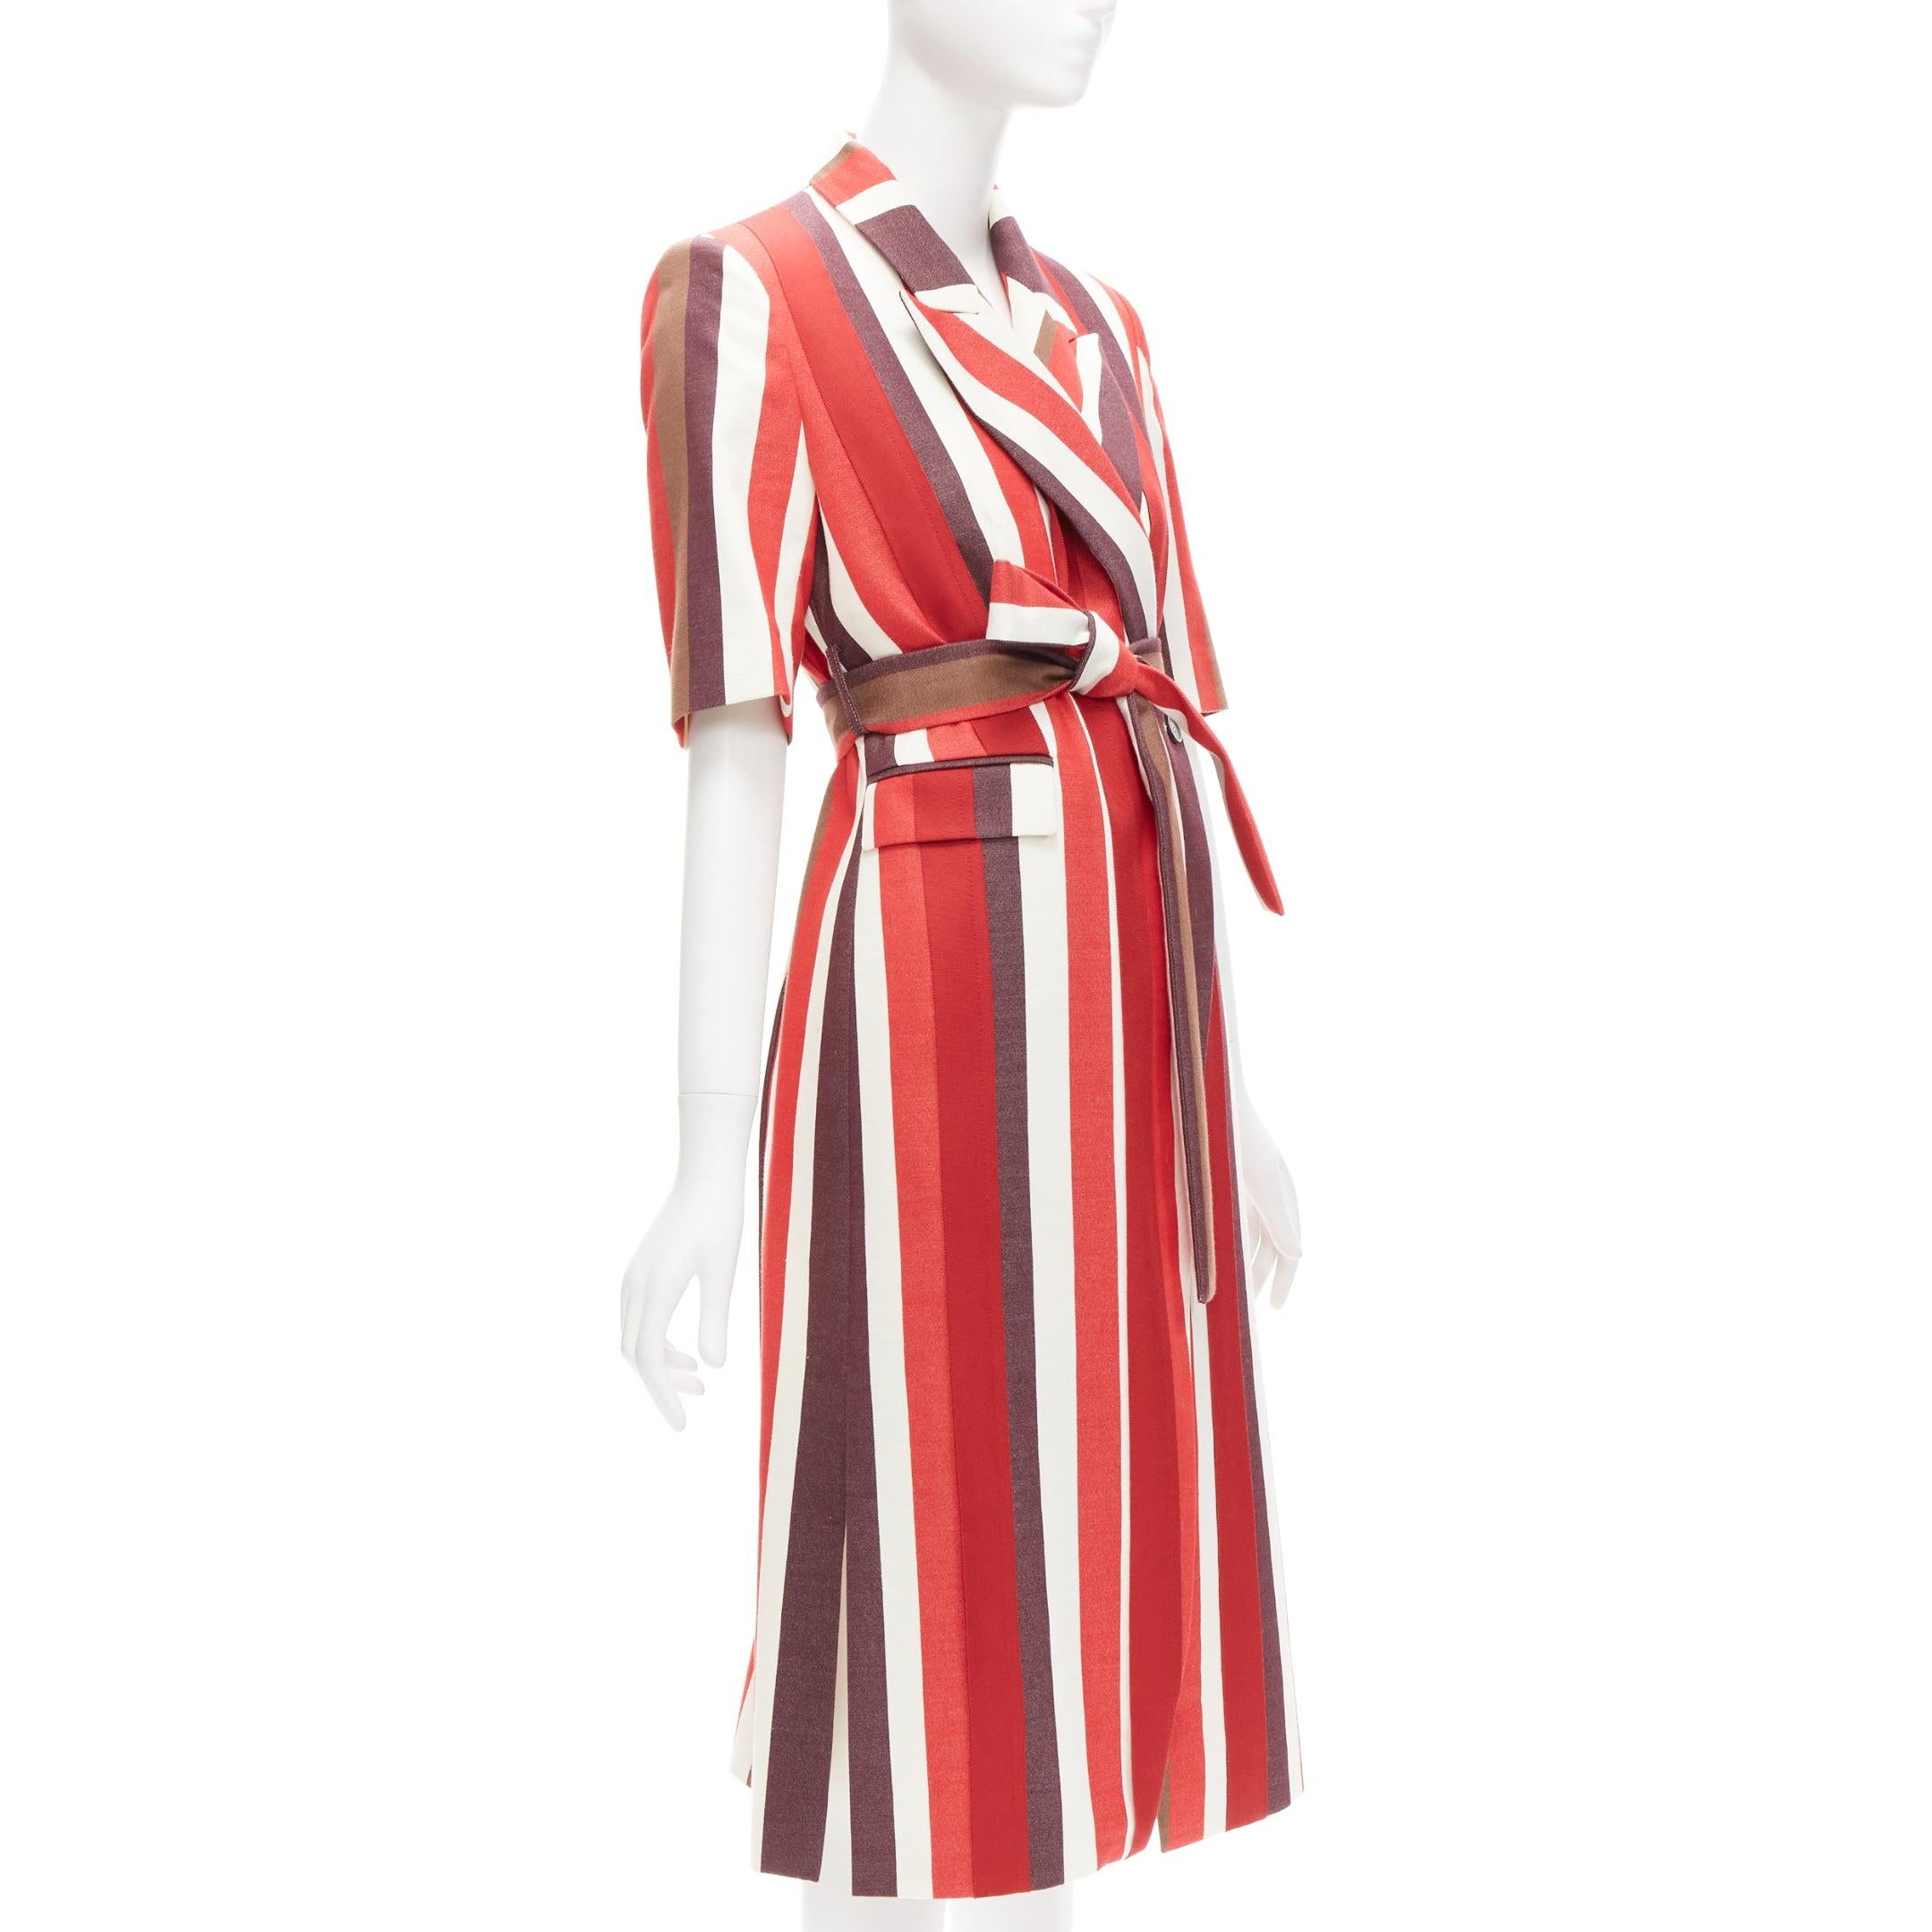 FRENKEN red bold graphic stripes cotton tie belt long coat IT34 XXS
Reference: CELG/A00371
Brand: Frenken
Material: Cotton, Blend
Color: Red, White
Pattern: Striped
Closure: Belt
Lining: Cream Fabric
Extra Details: Slightly padded at shoulders.